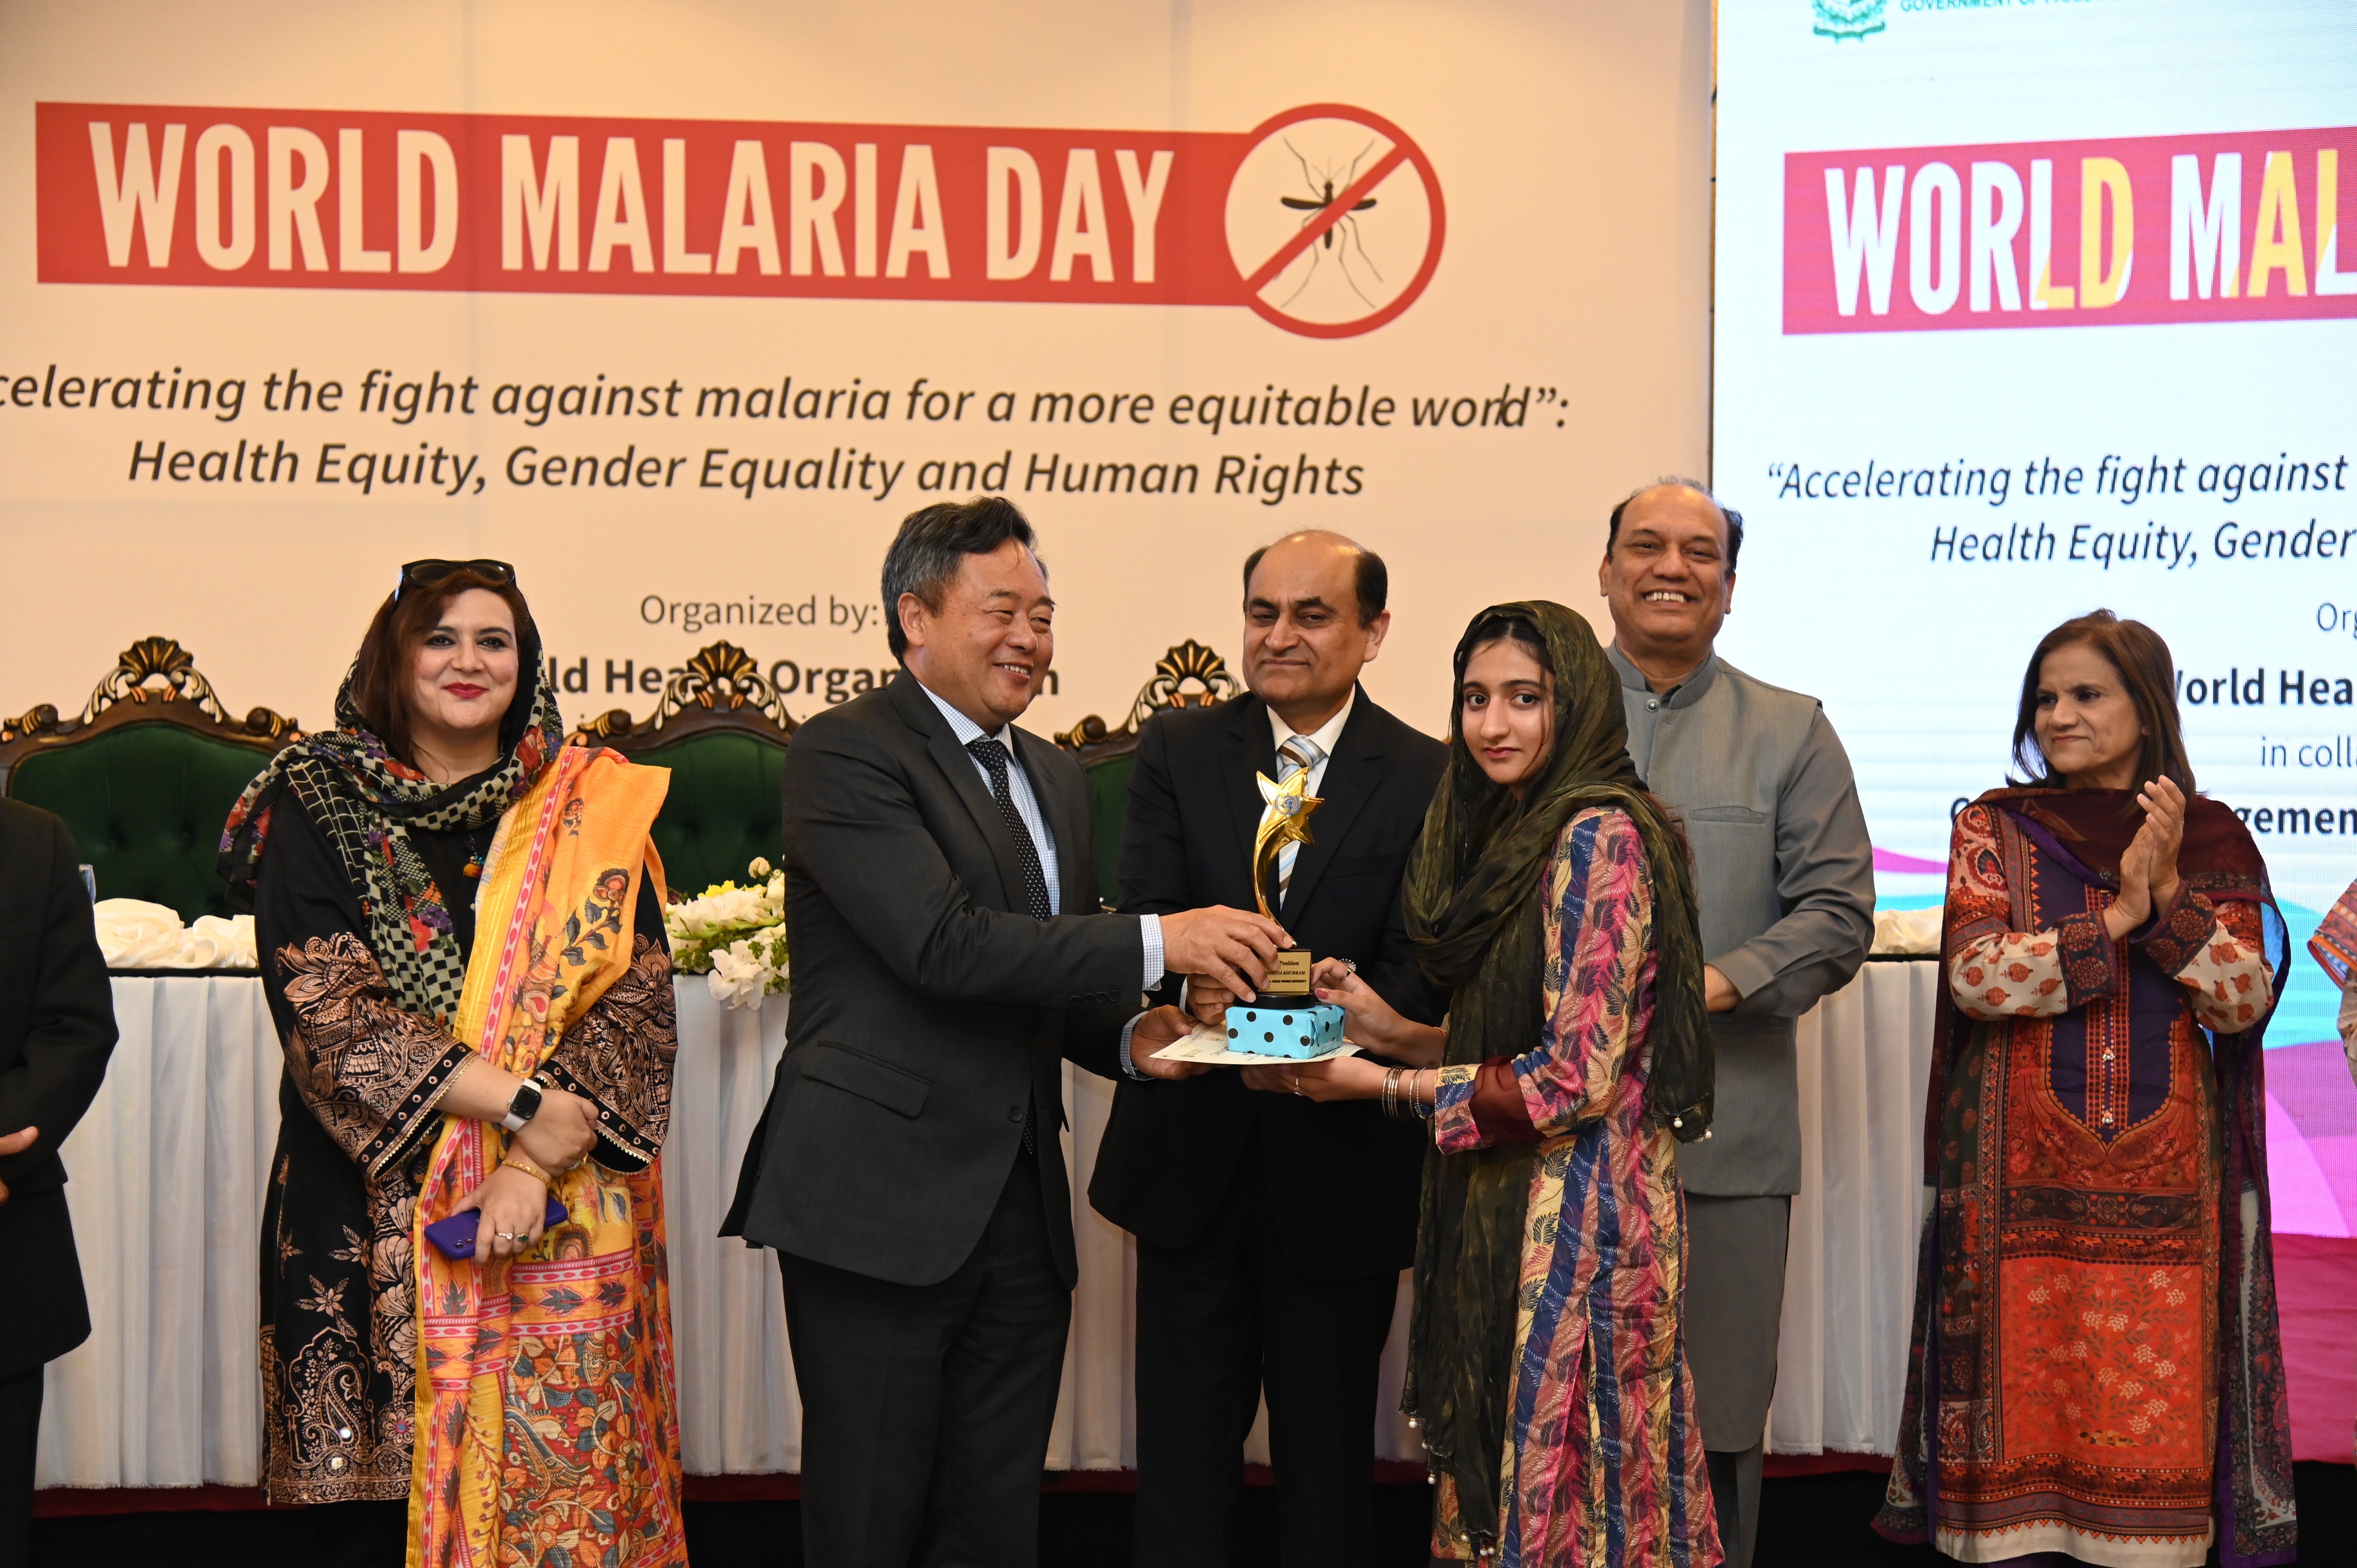 The shield distribution at the event of World Malaria Day 2027